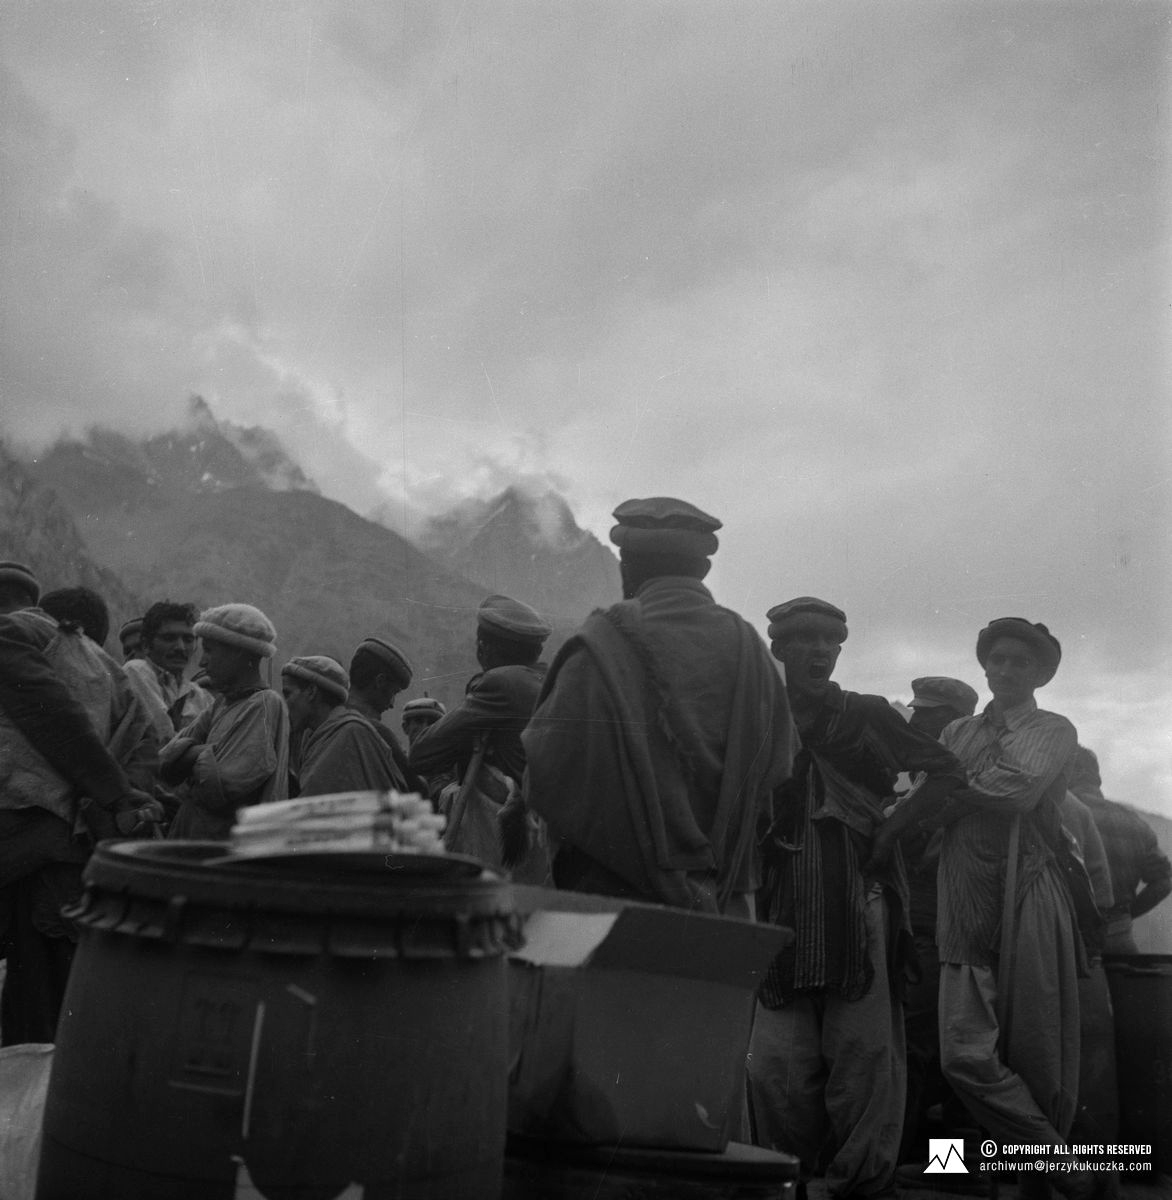 Porters in the base camp.